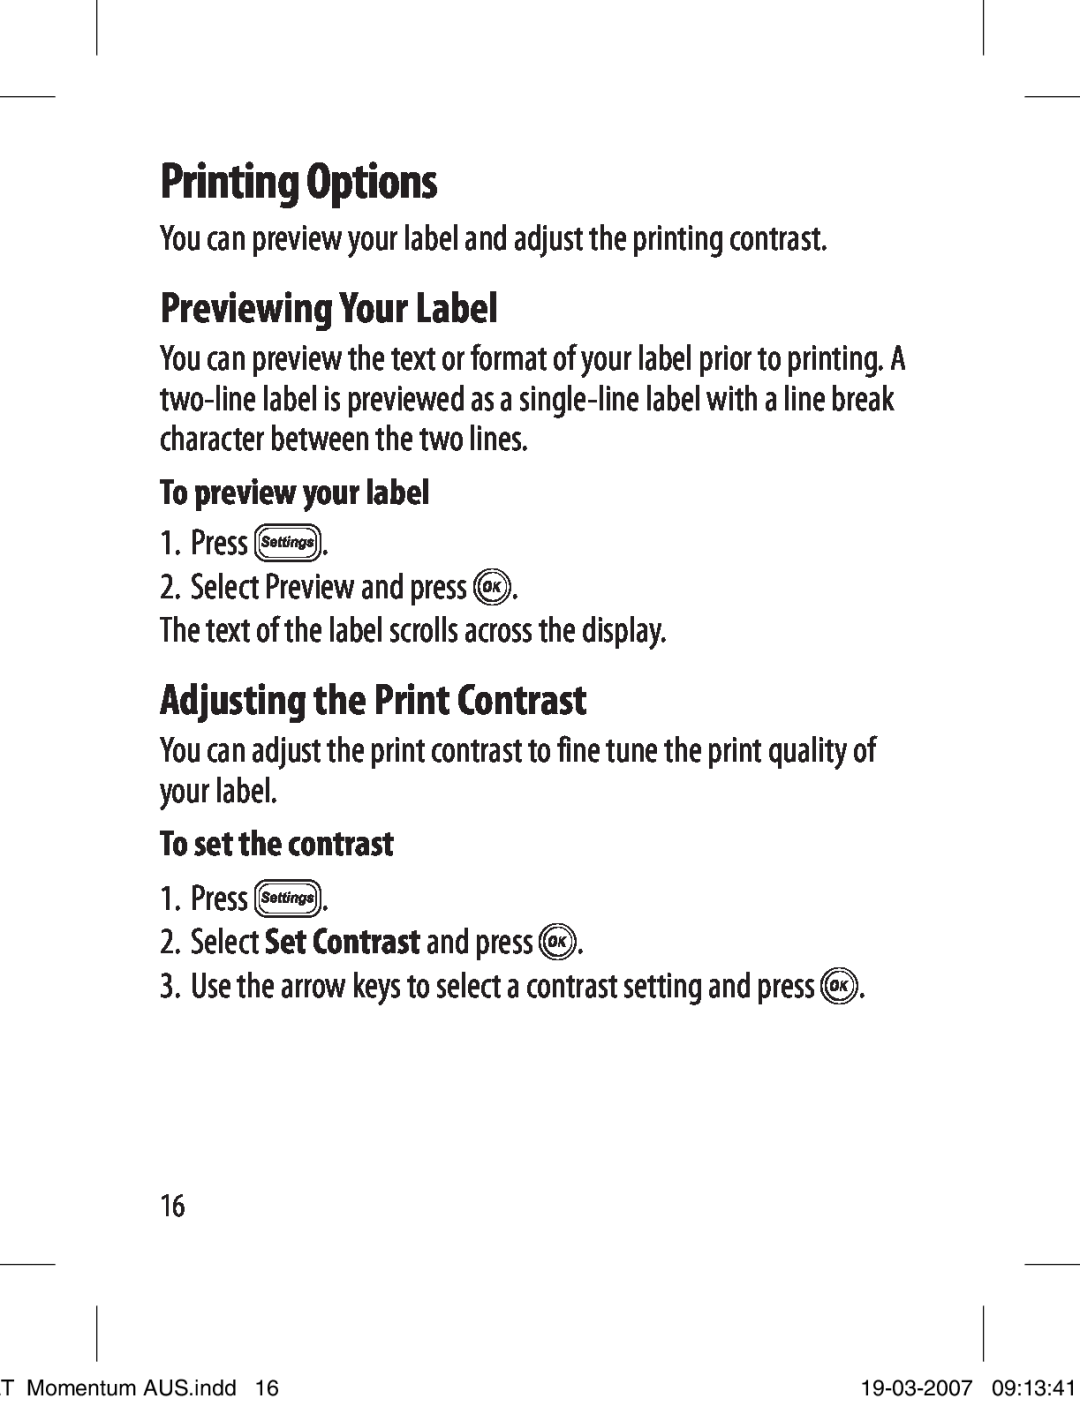 Dymo LT-100T manual Printing Options, Previewing Your Label, Adjusting the Print Contrast 